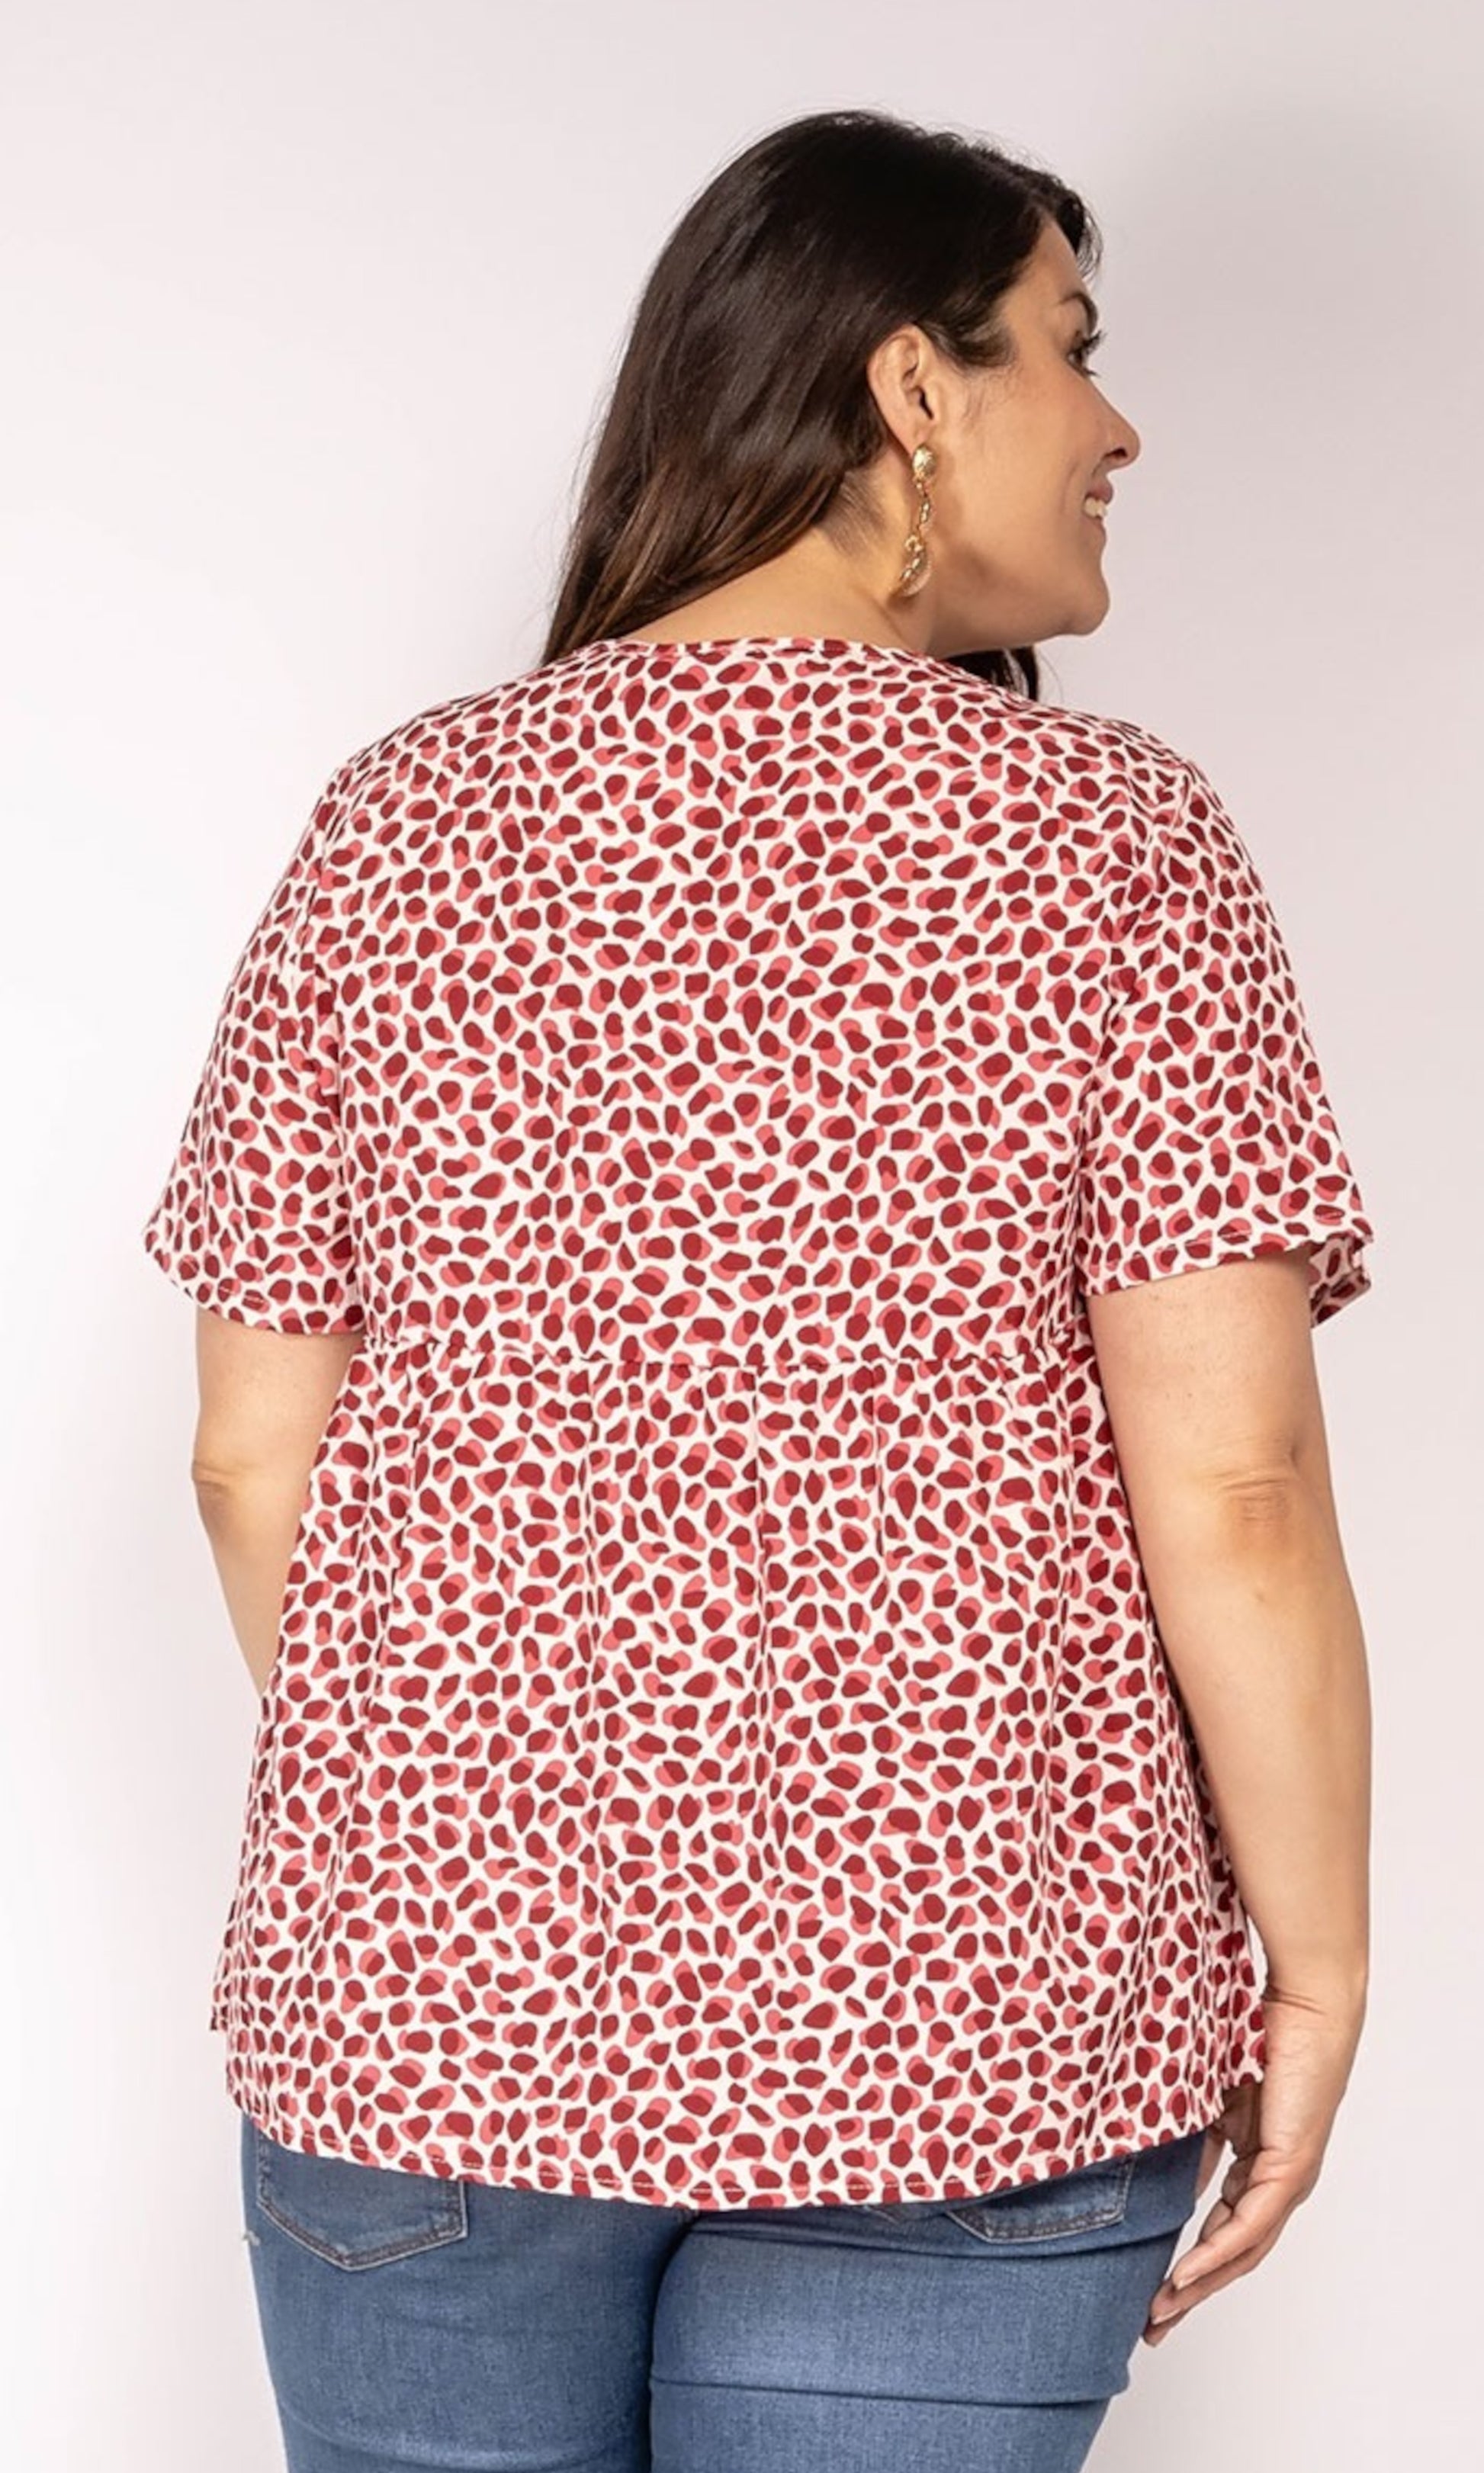 Zomerse plussize top